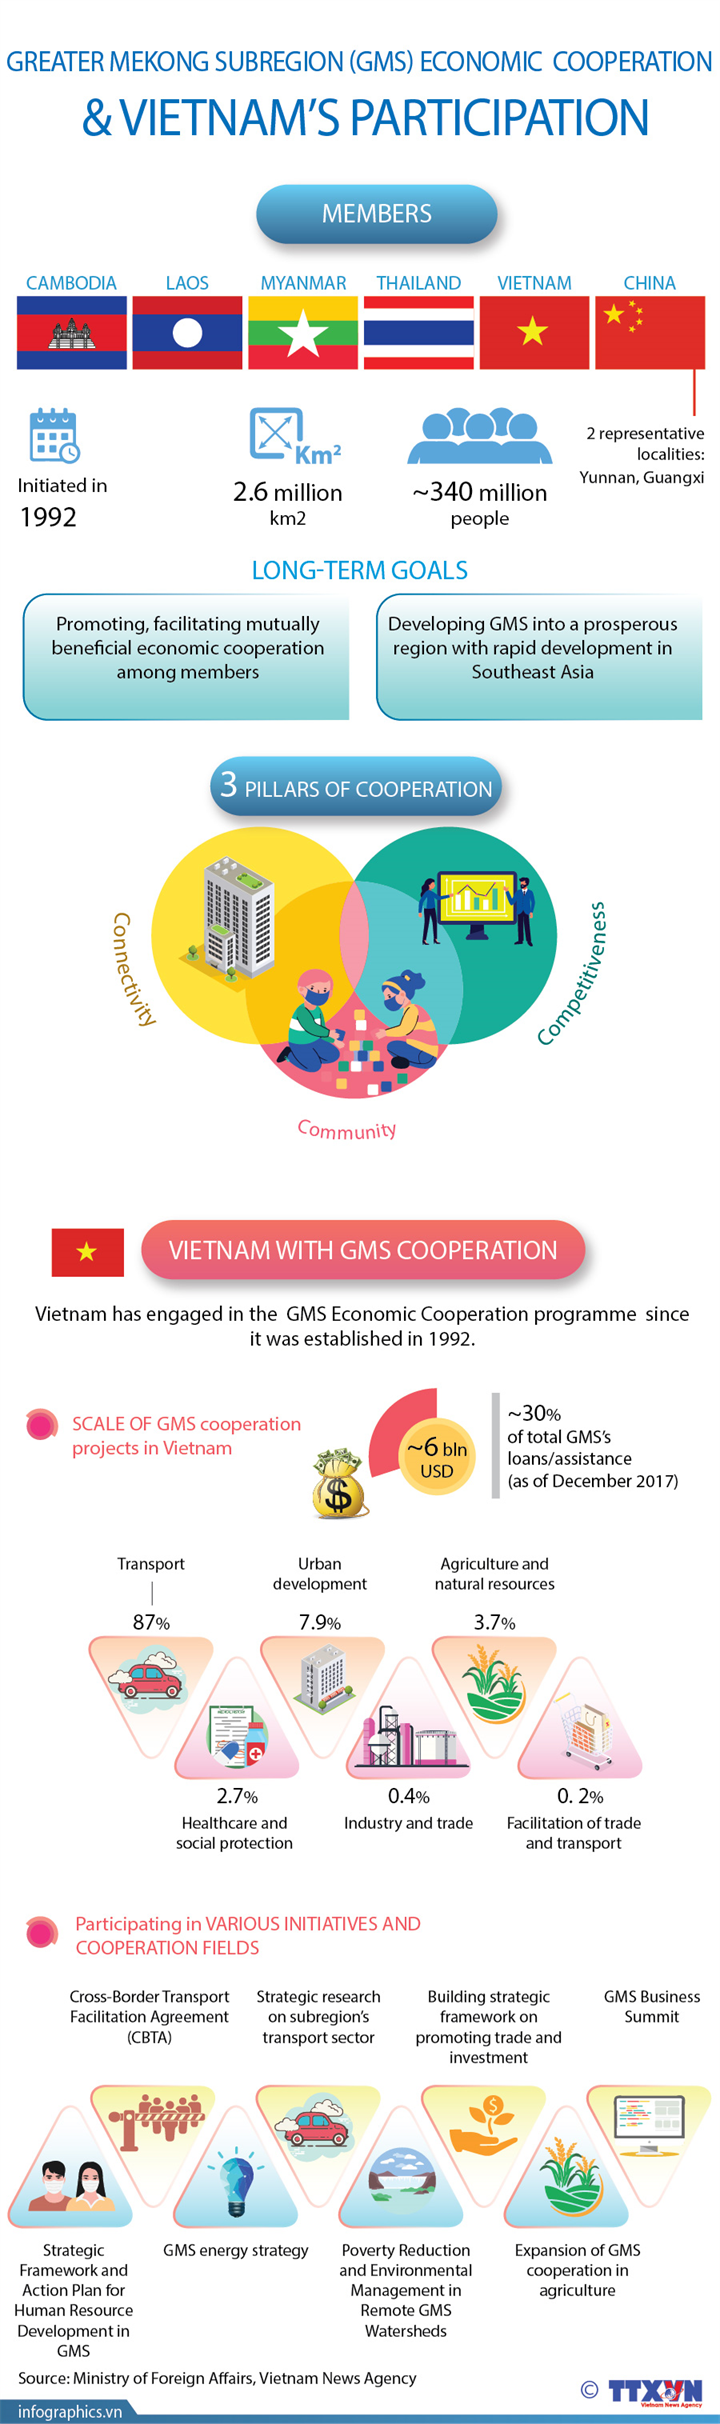 Greater Mekong Subregion (GMS) economic cooperation & Vietnam's participation